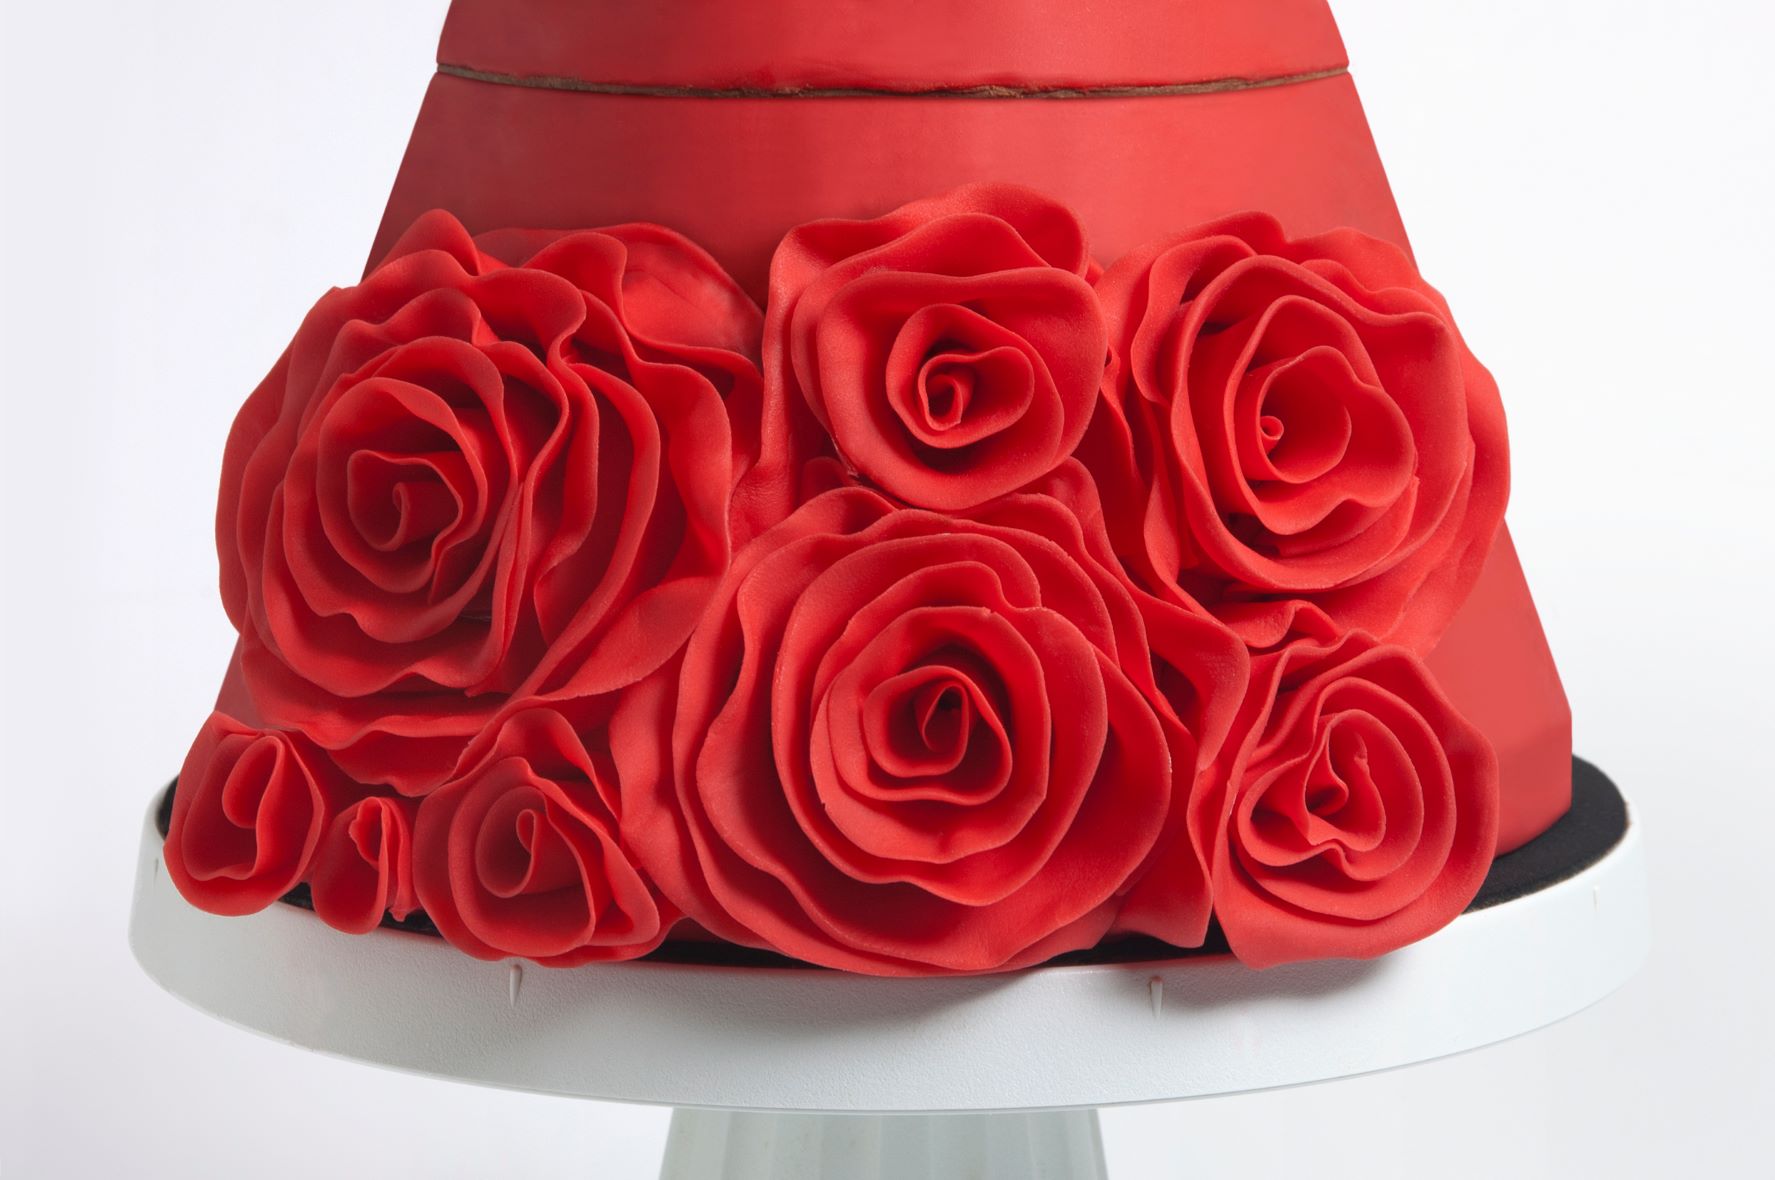 Make more roses of different sizes to fill the empty spaces. Make sure you build up from the base of the cake so the roses can rest on each other slightly.